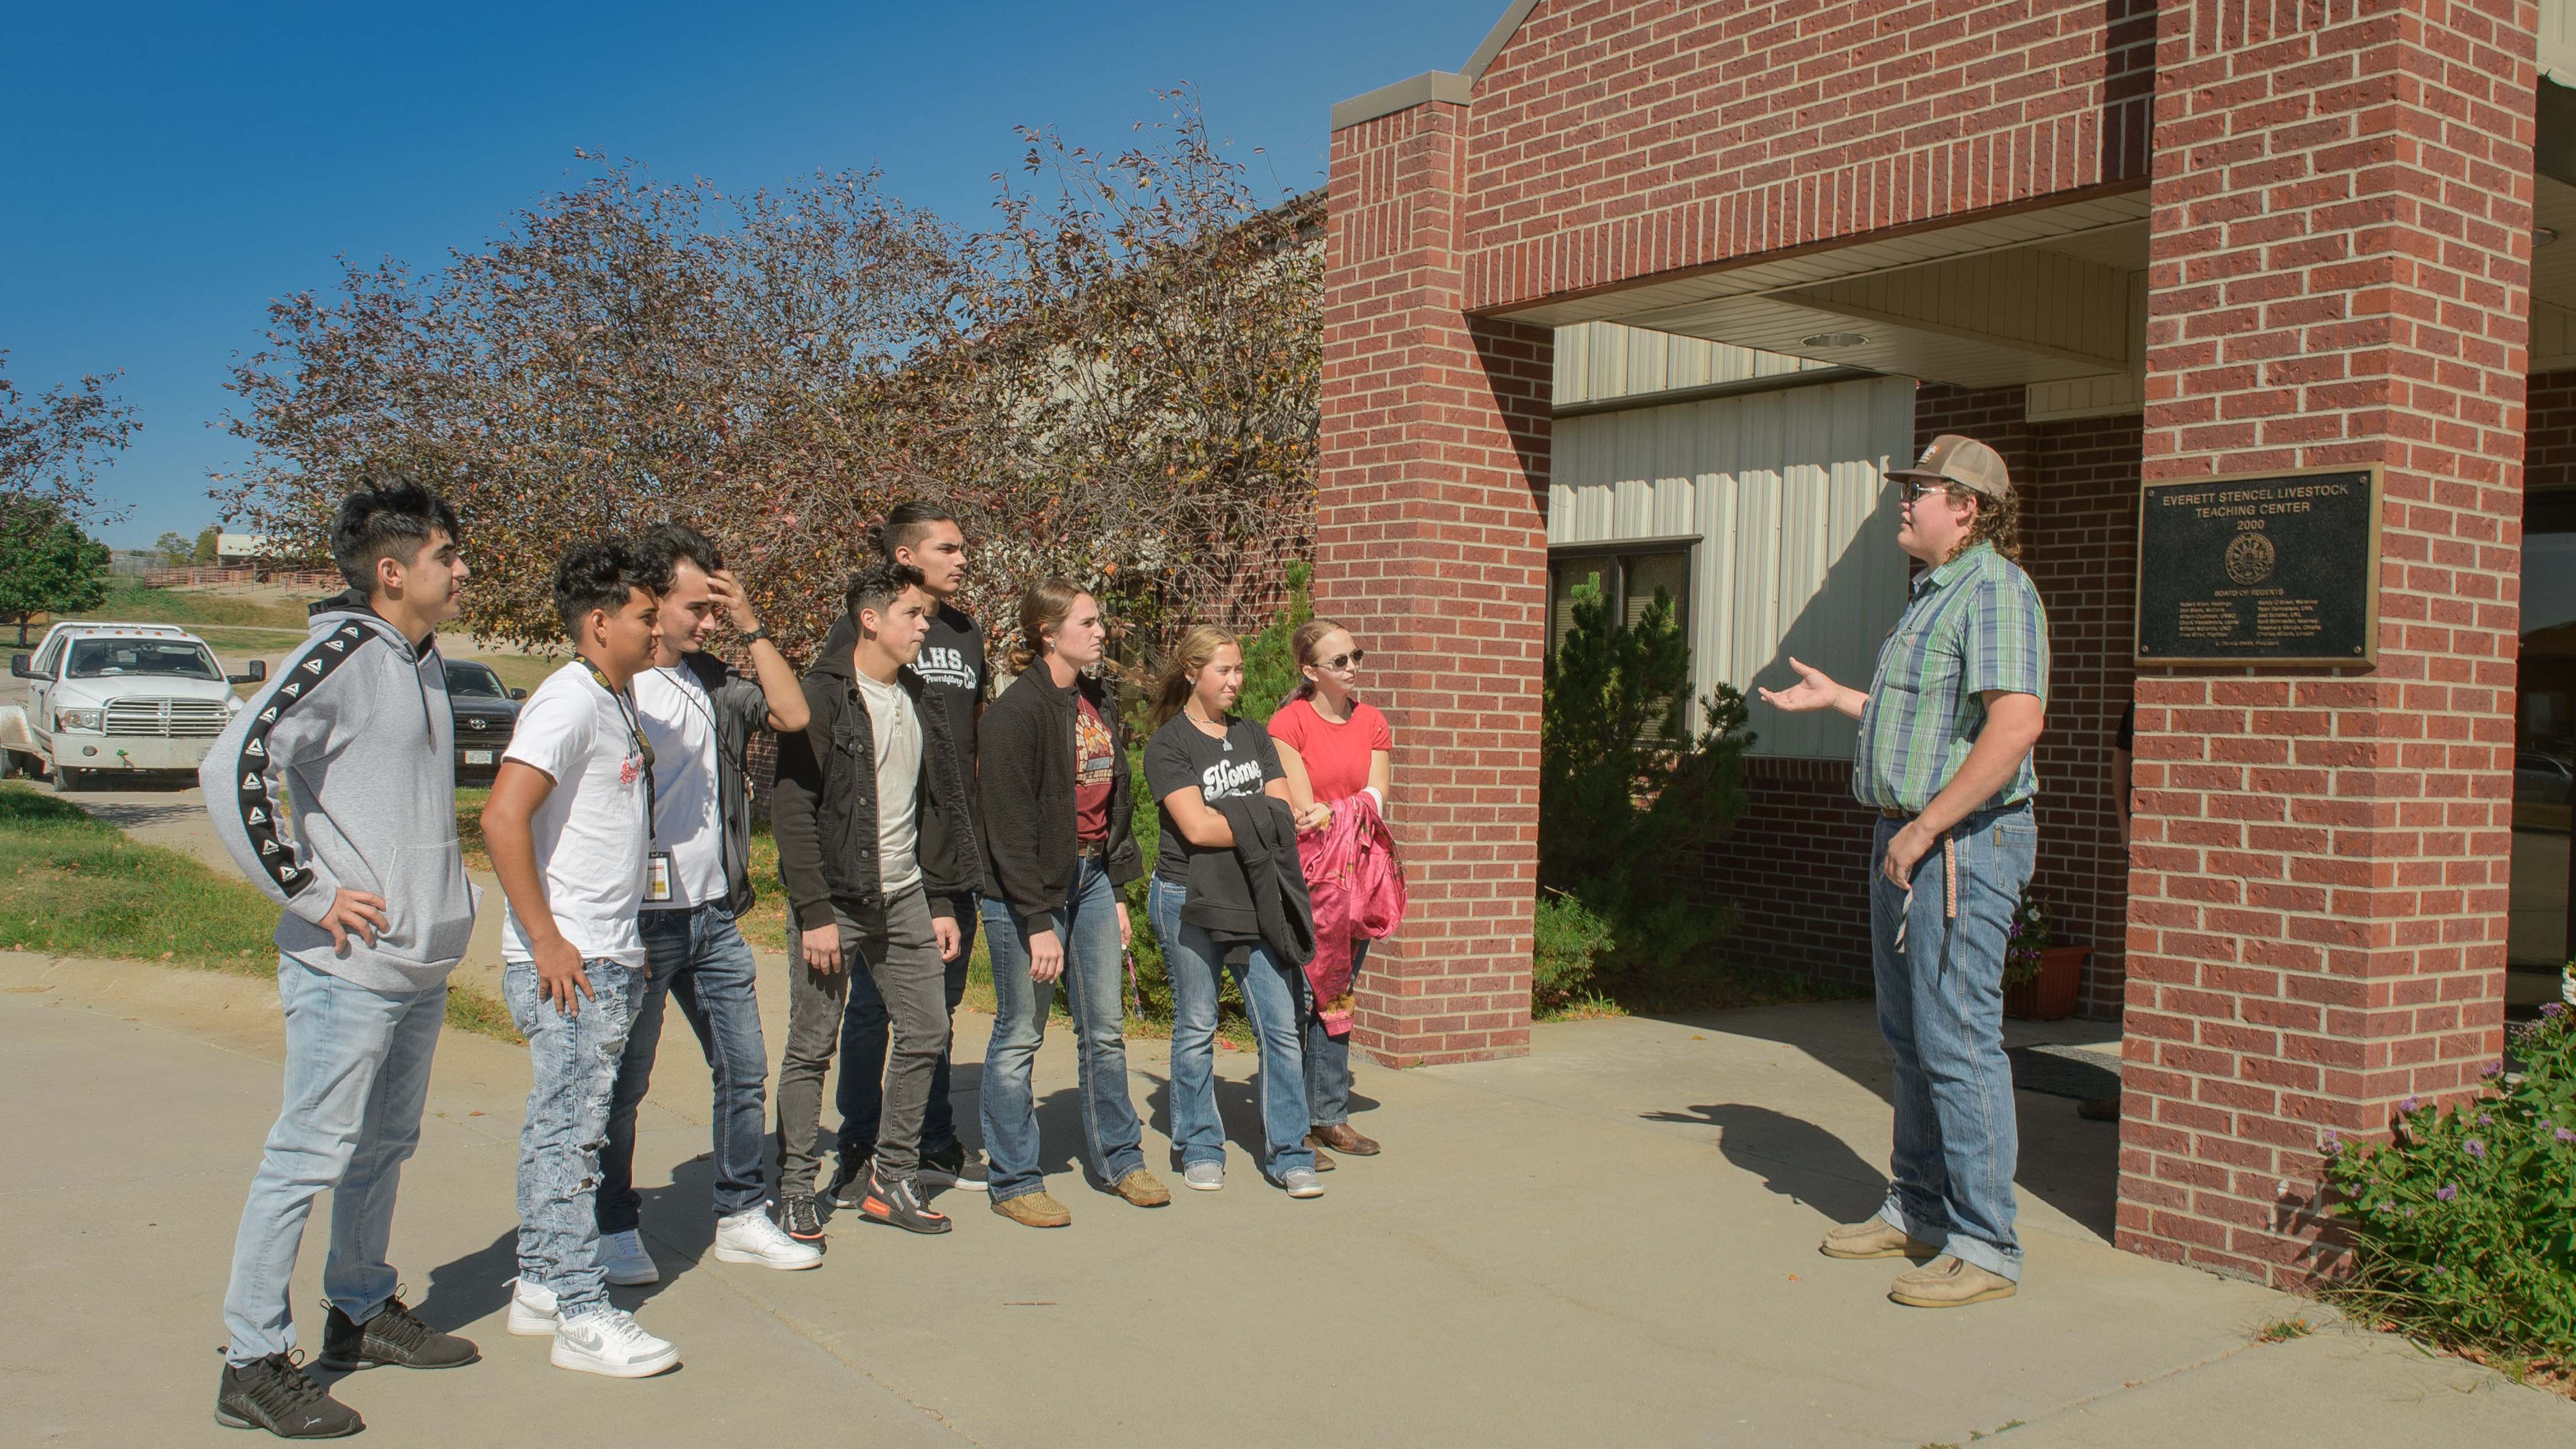 Aggie student ambassador Clayton Runkle gave a tour in October to students from Lexington, describing Animal Science and Equine Industry Management programs at the NCTA Livestock Teaching Center. (George Hipple / NCTA Photo) 